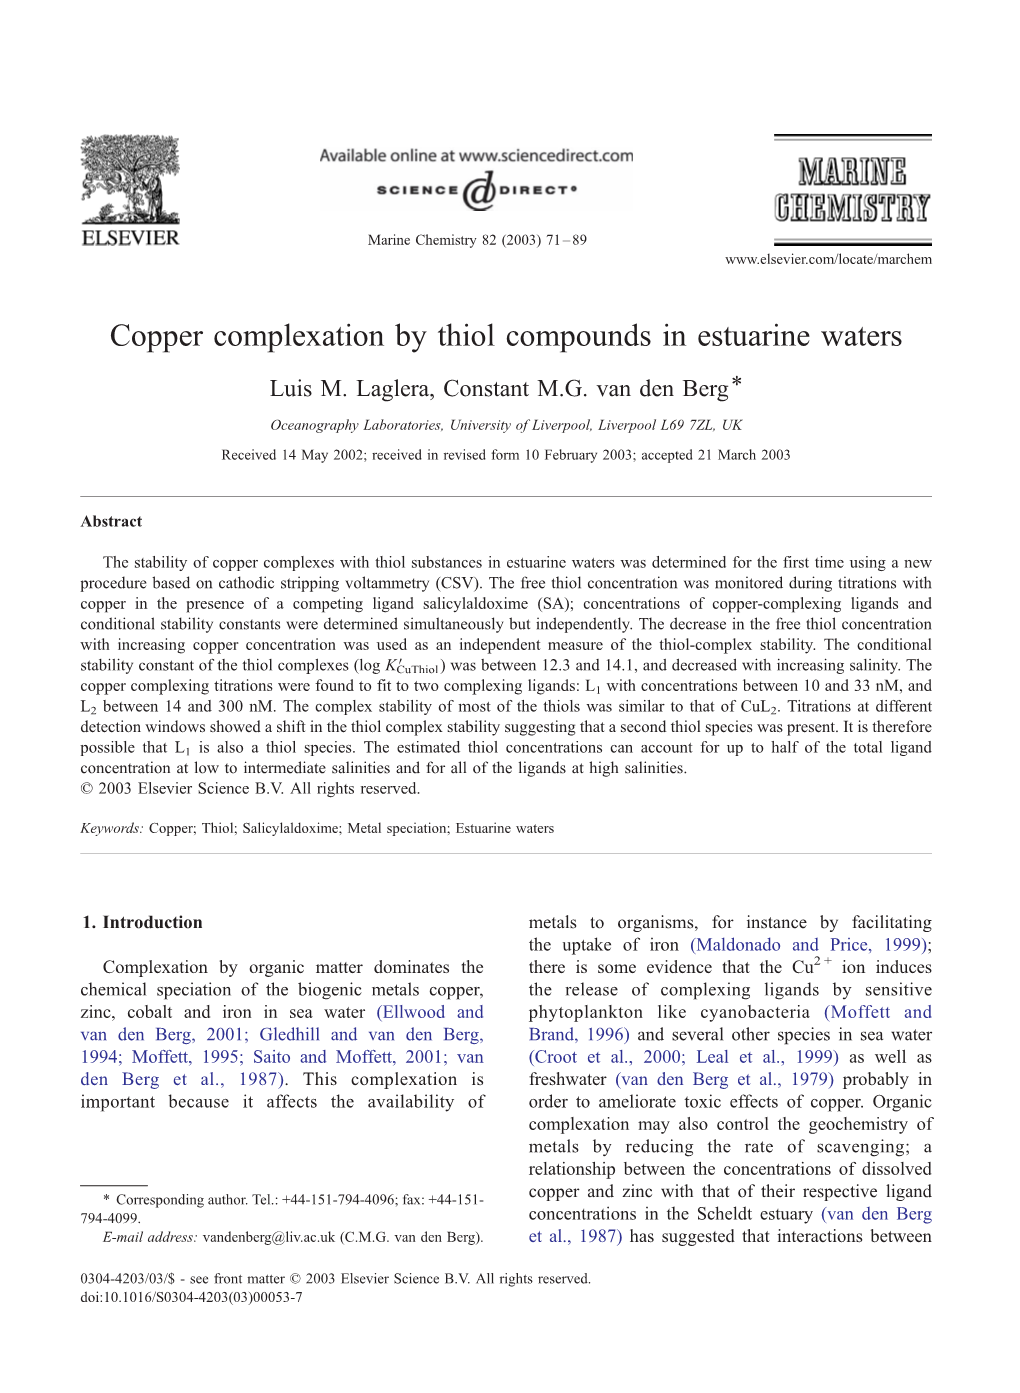 Copper Complexation by Thiol Compounds in Estuarine Waters